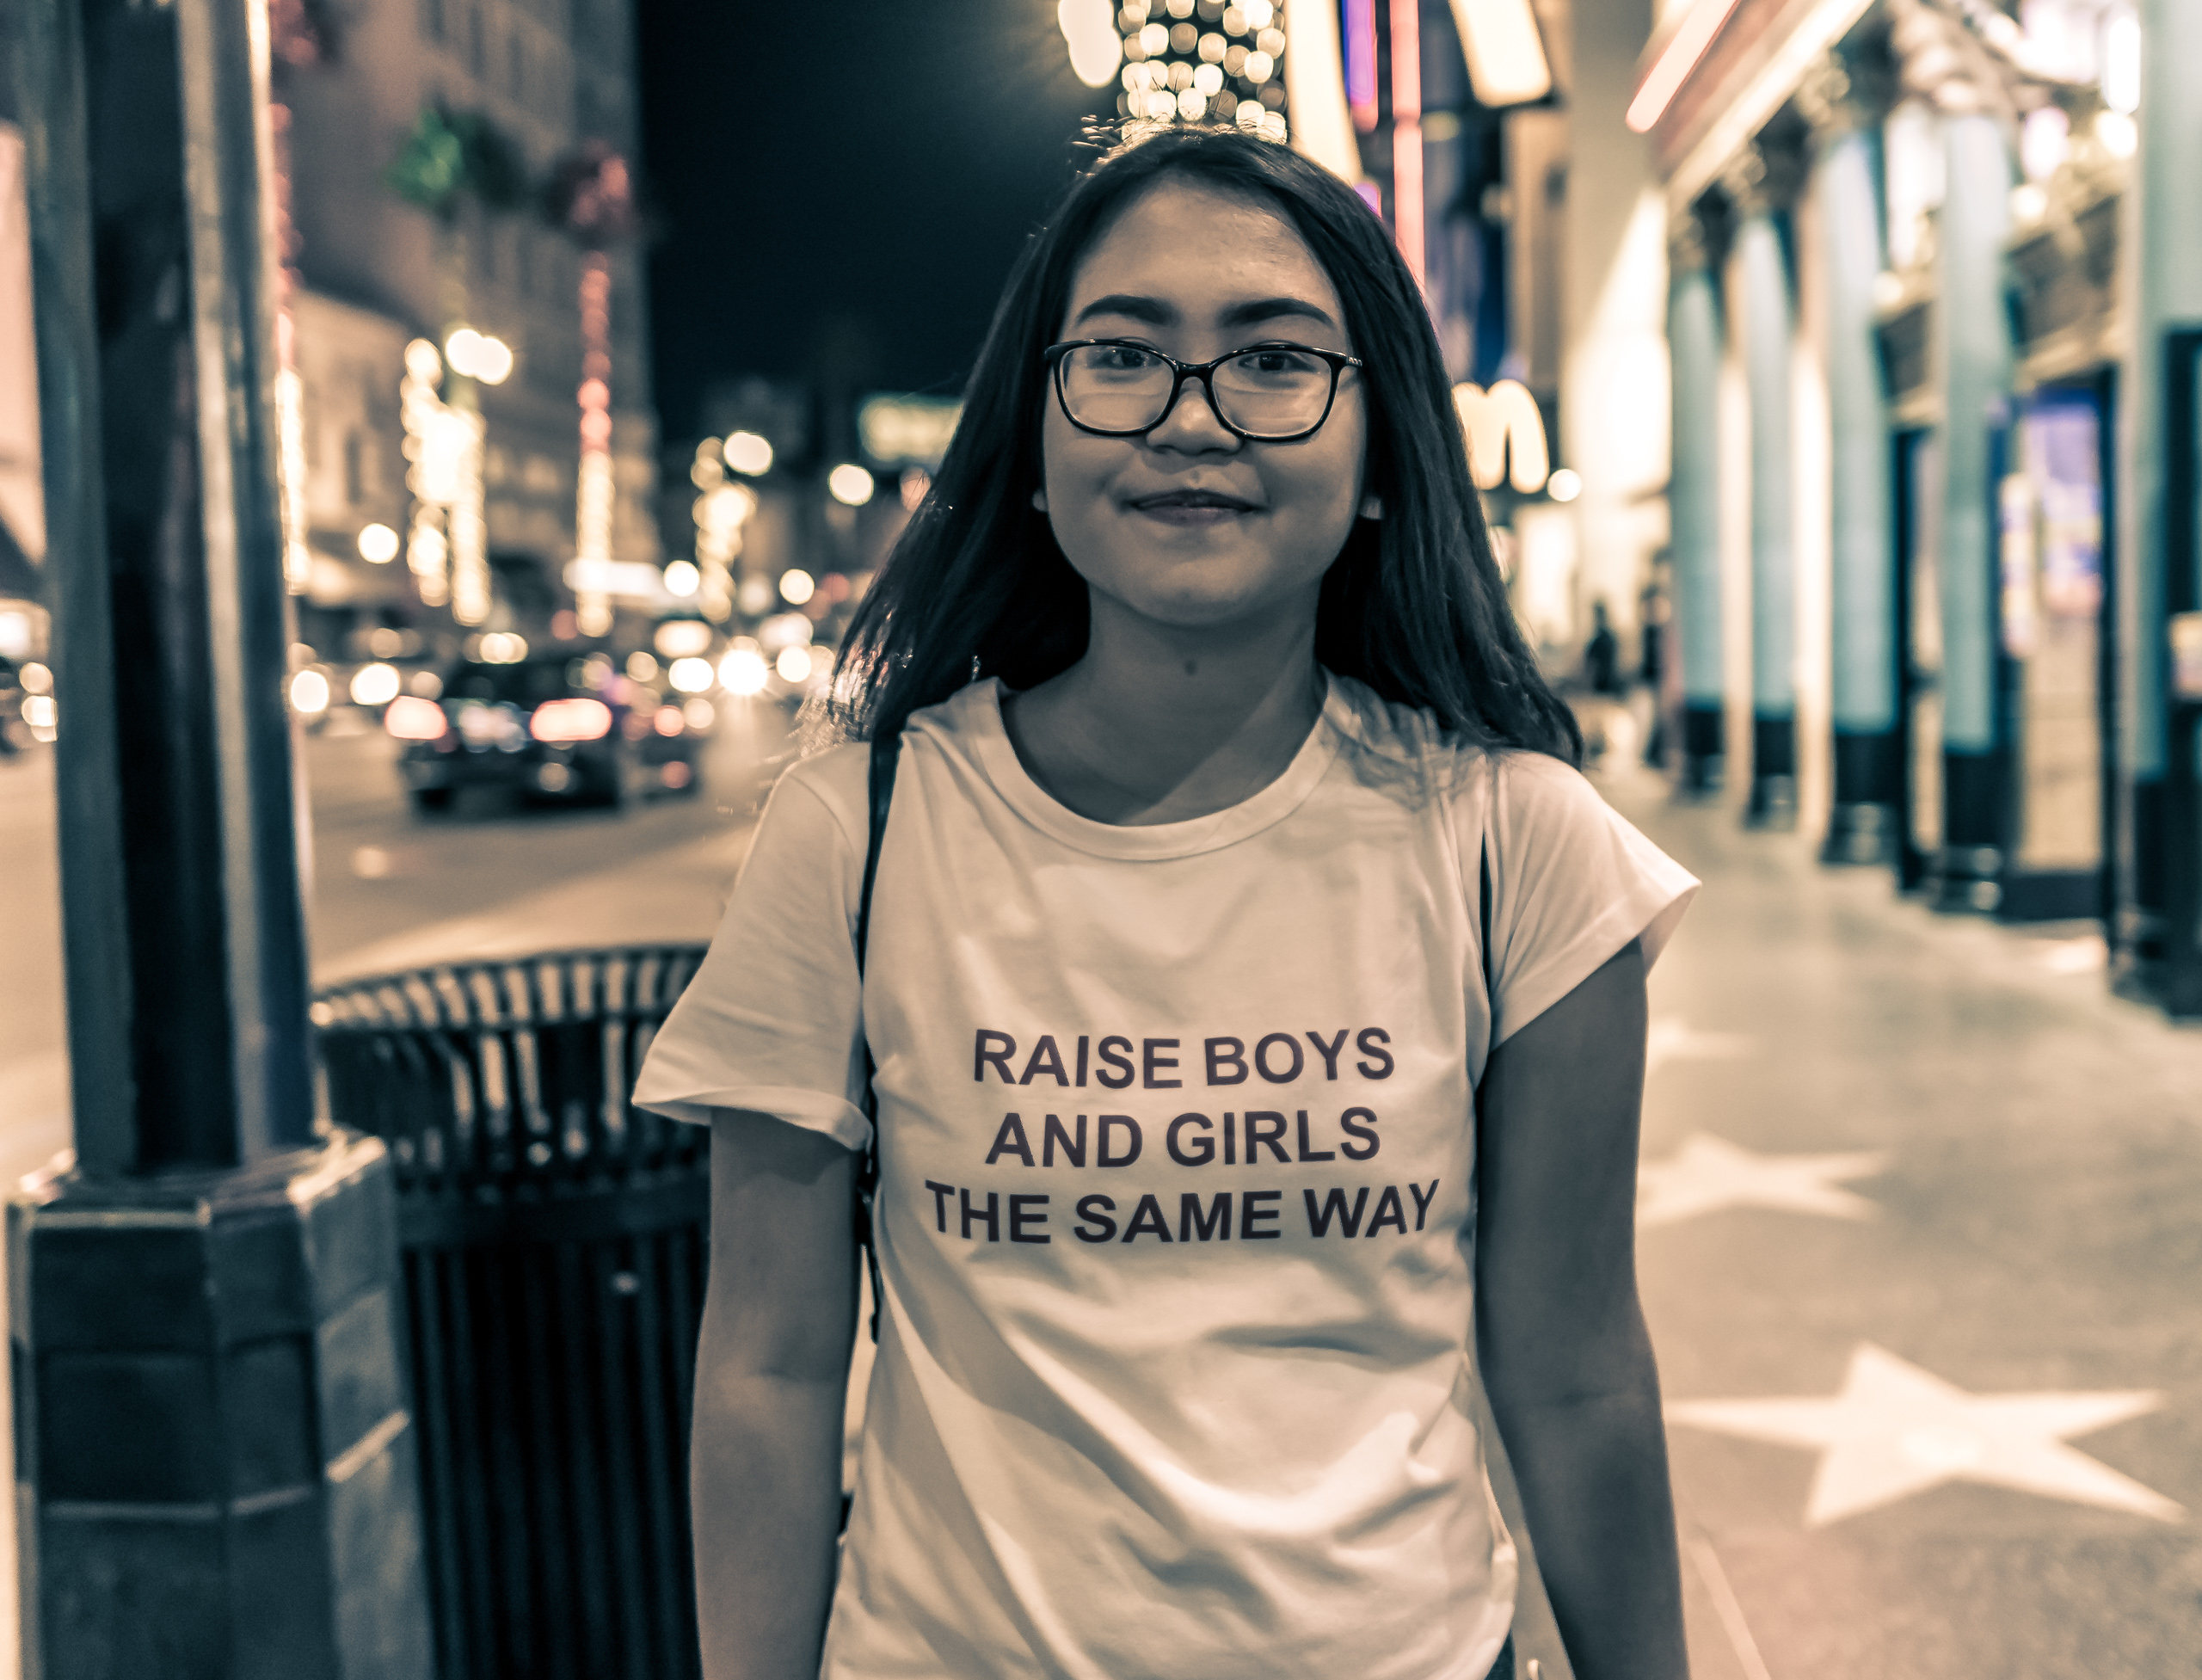 a woman on Hollywood Blvd wearing a t-shirt that reads "Raise Boys and Girls the Same Way"